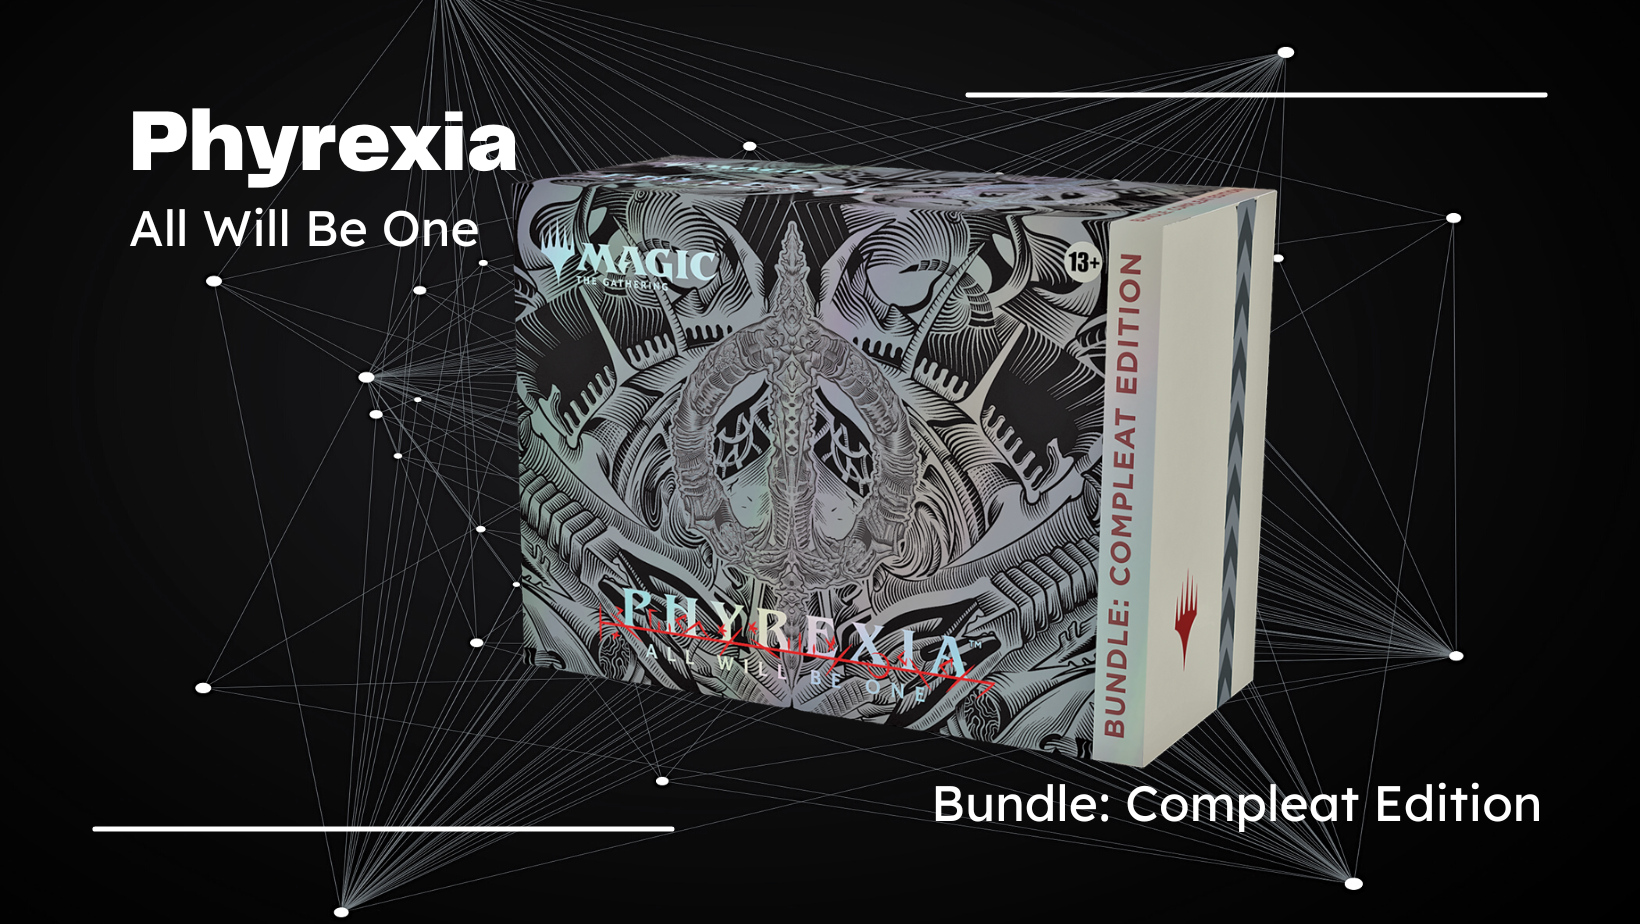 Phyrexia Compleat Bundle